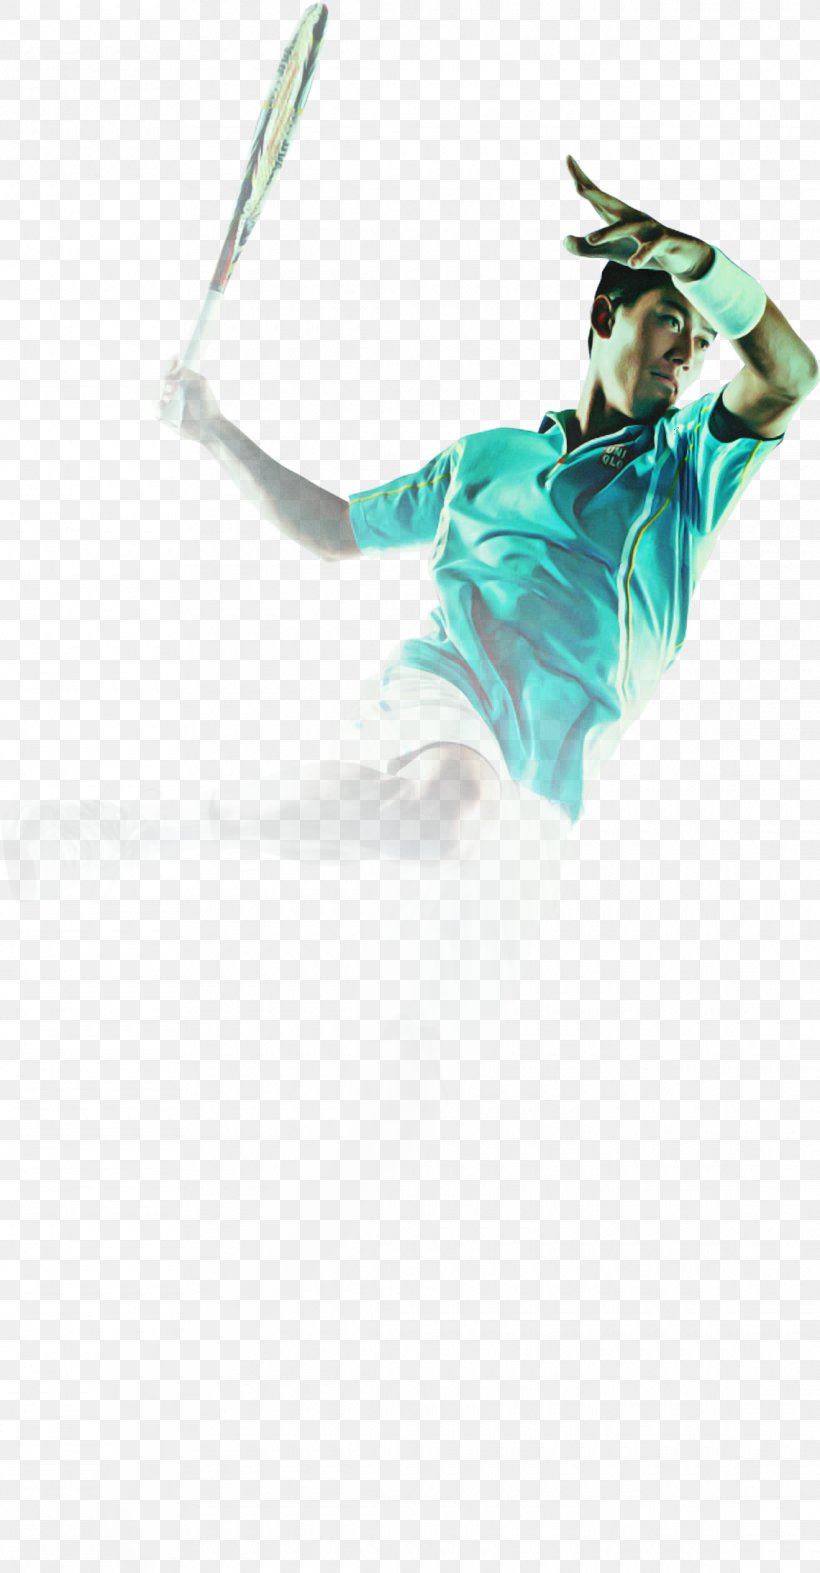 Turquoise Sportswear, PNG, 1140x2188px, Turquoise, Sportswear Download Free